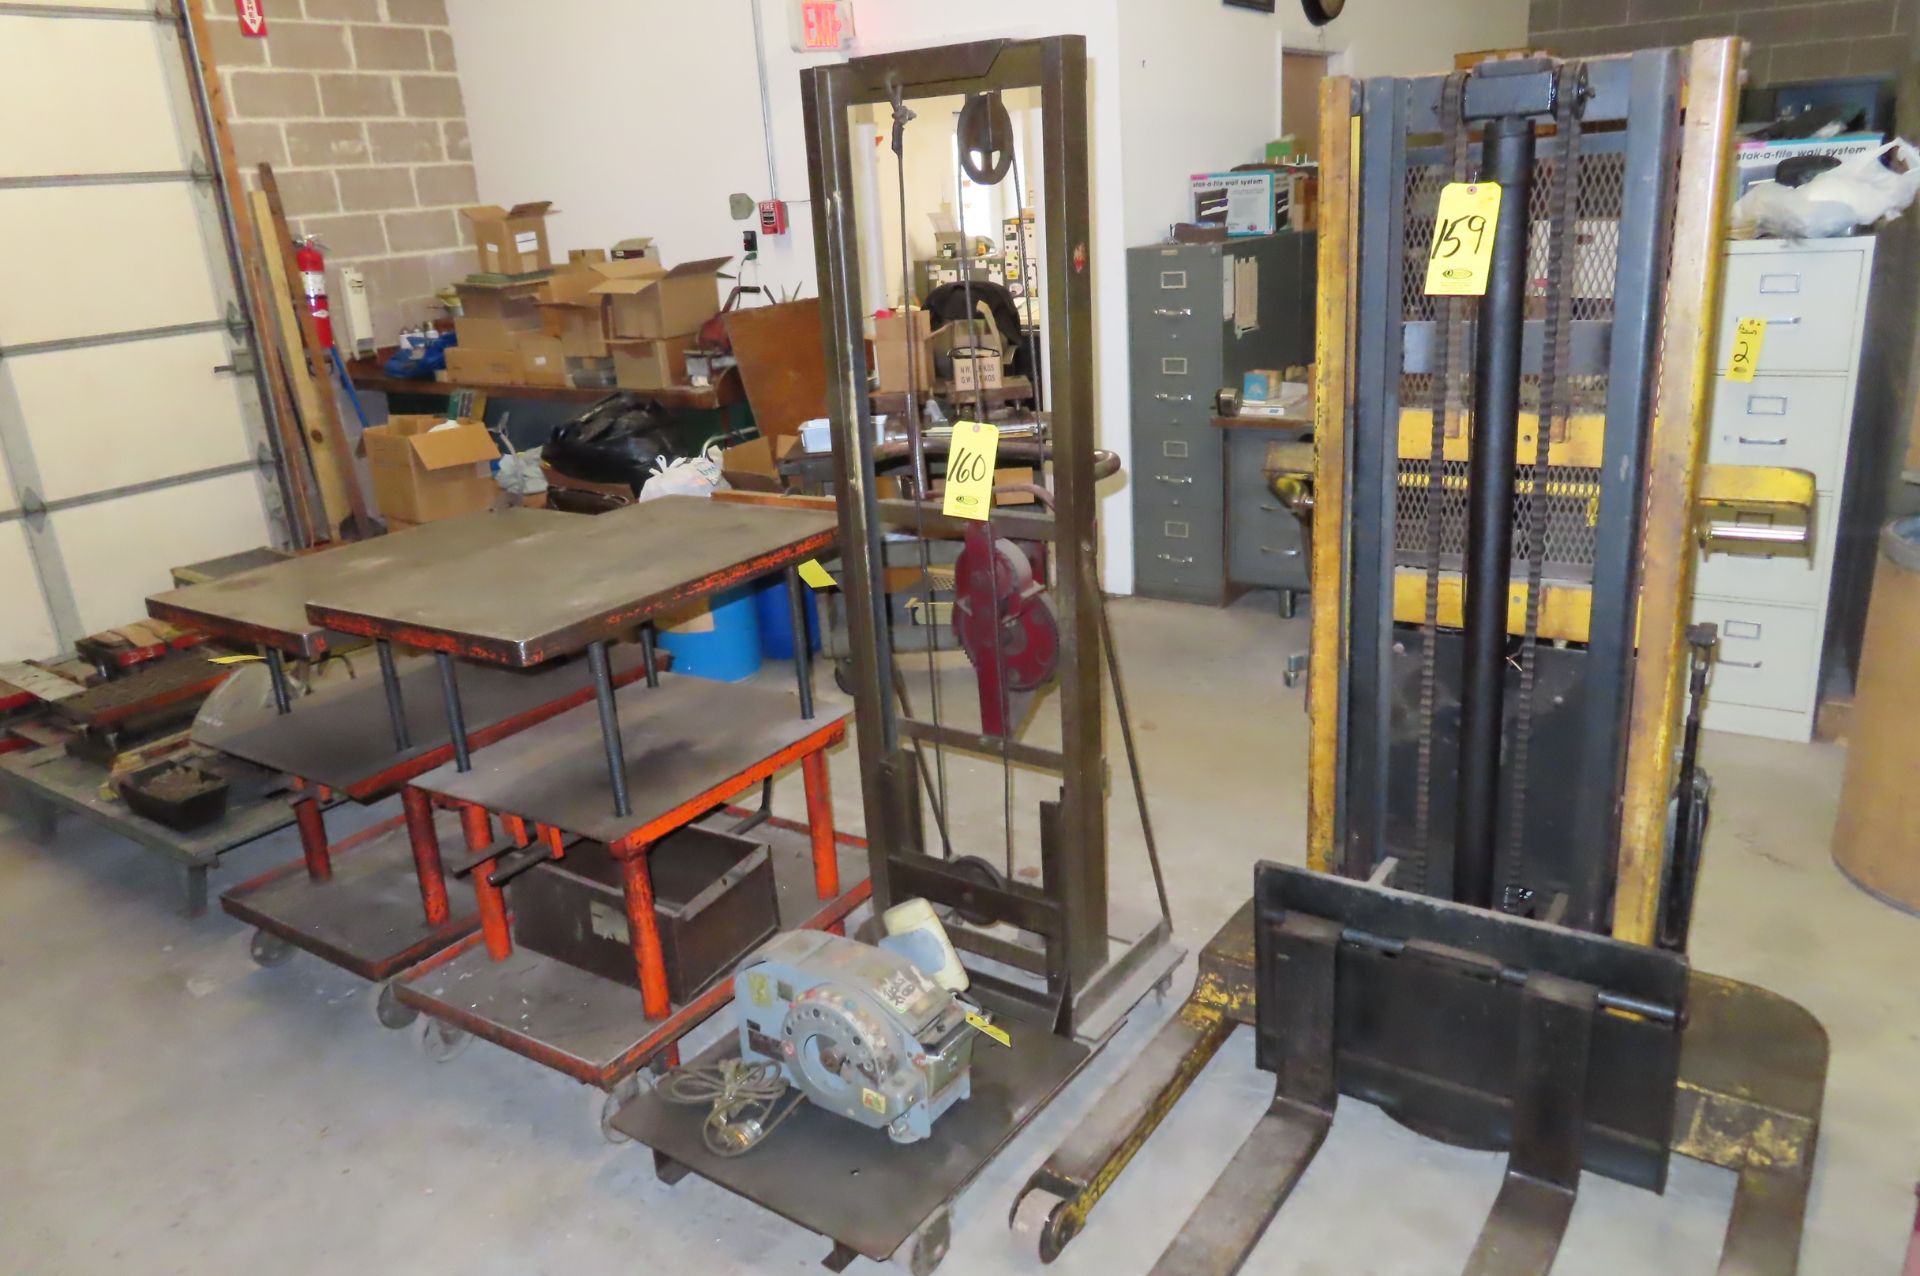 SHOPLIFTER WALK BEHIND CABLE CRANK LIFT - Image 2 of 2